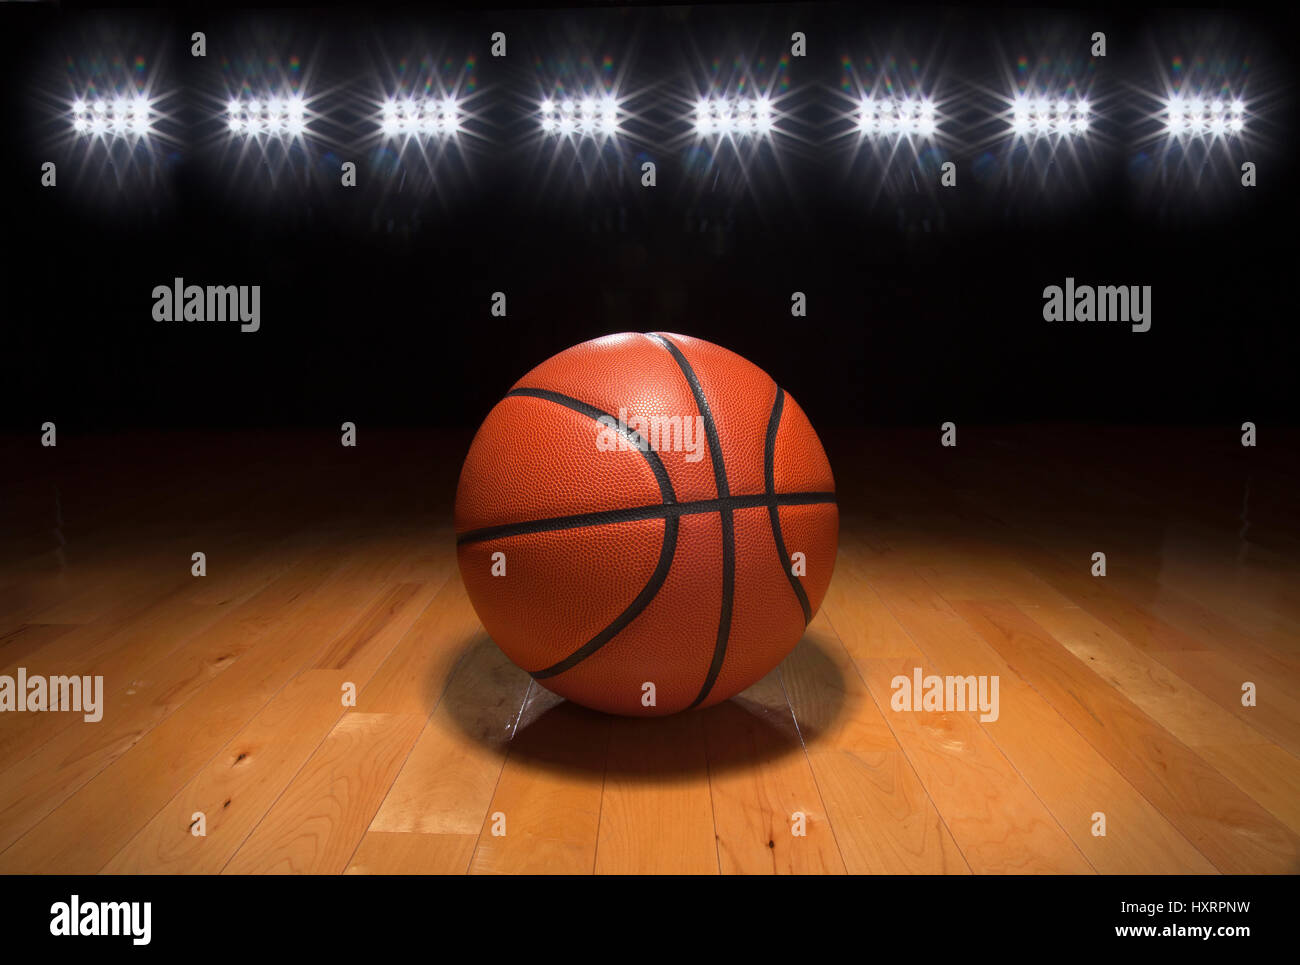 A basketball on a wood floor beneath bright arena lights Stock Photo